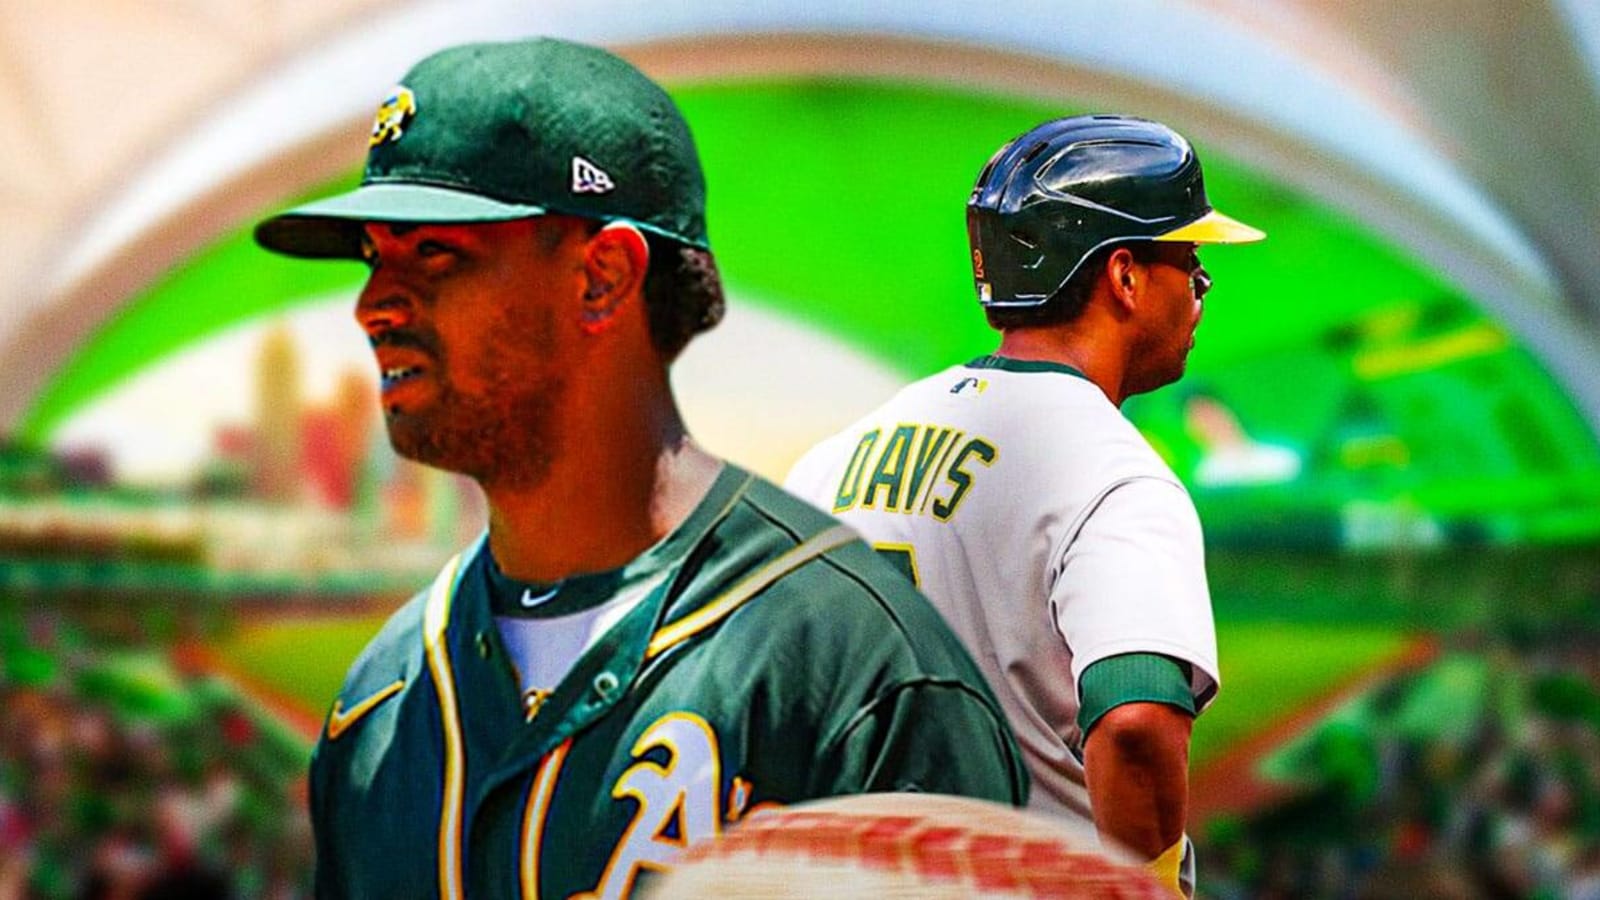 How Fast & Furious inspired former Athletics home run champ to become an auto mechanic